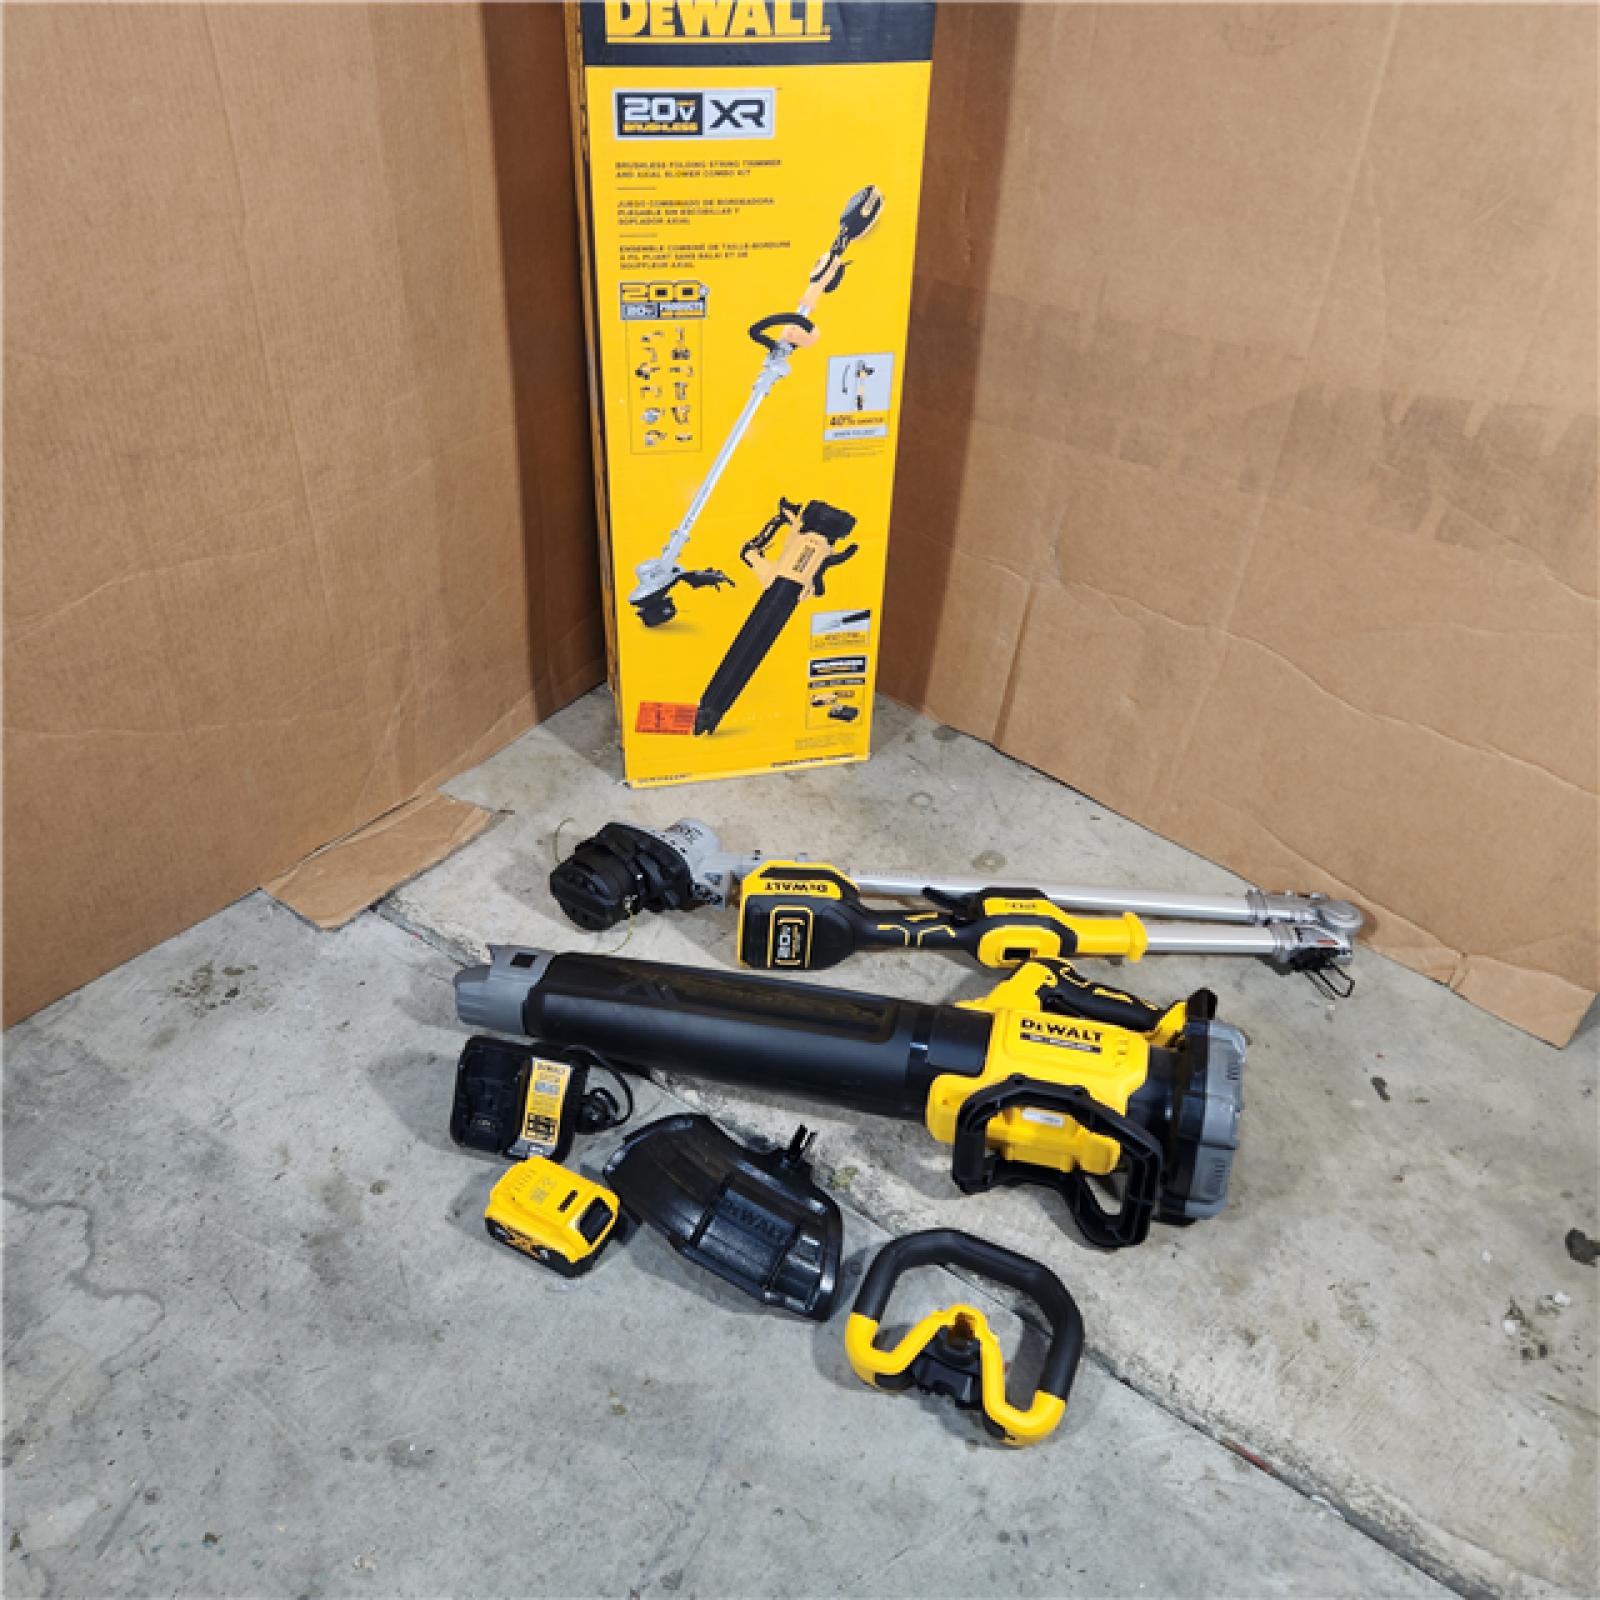 Houston location- AS-IS DEWALT 20V MAX Cordless Battery Powered String Trimmer & Leaf Blower Combo Kit with (1) 4.0 Ah Battery and Charger - Appears IN NEW Condition